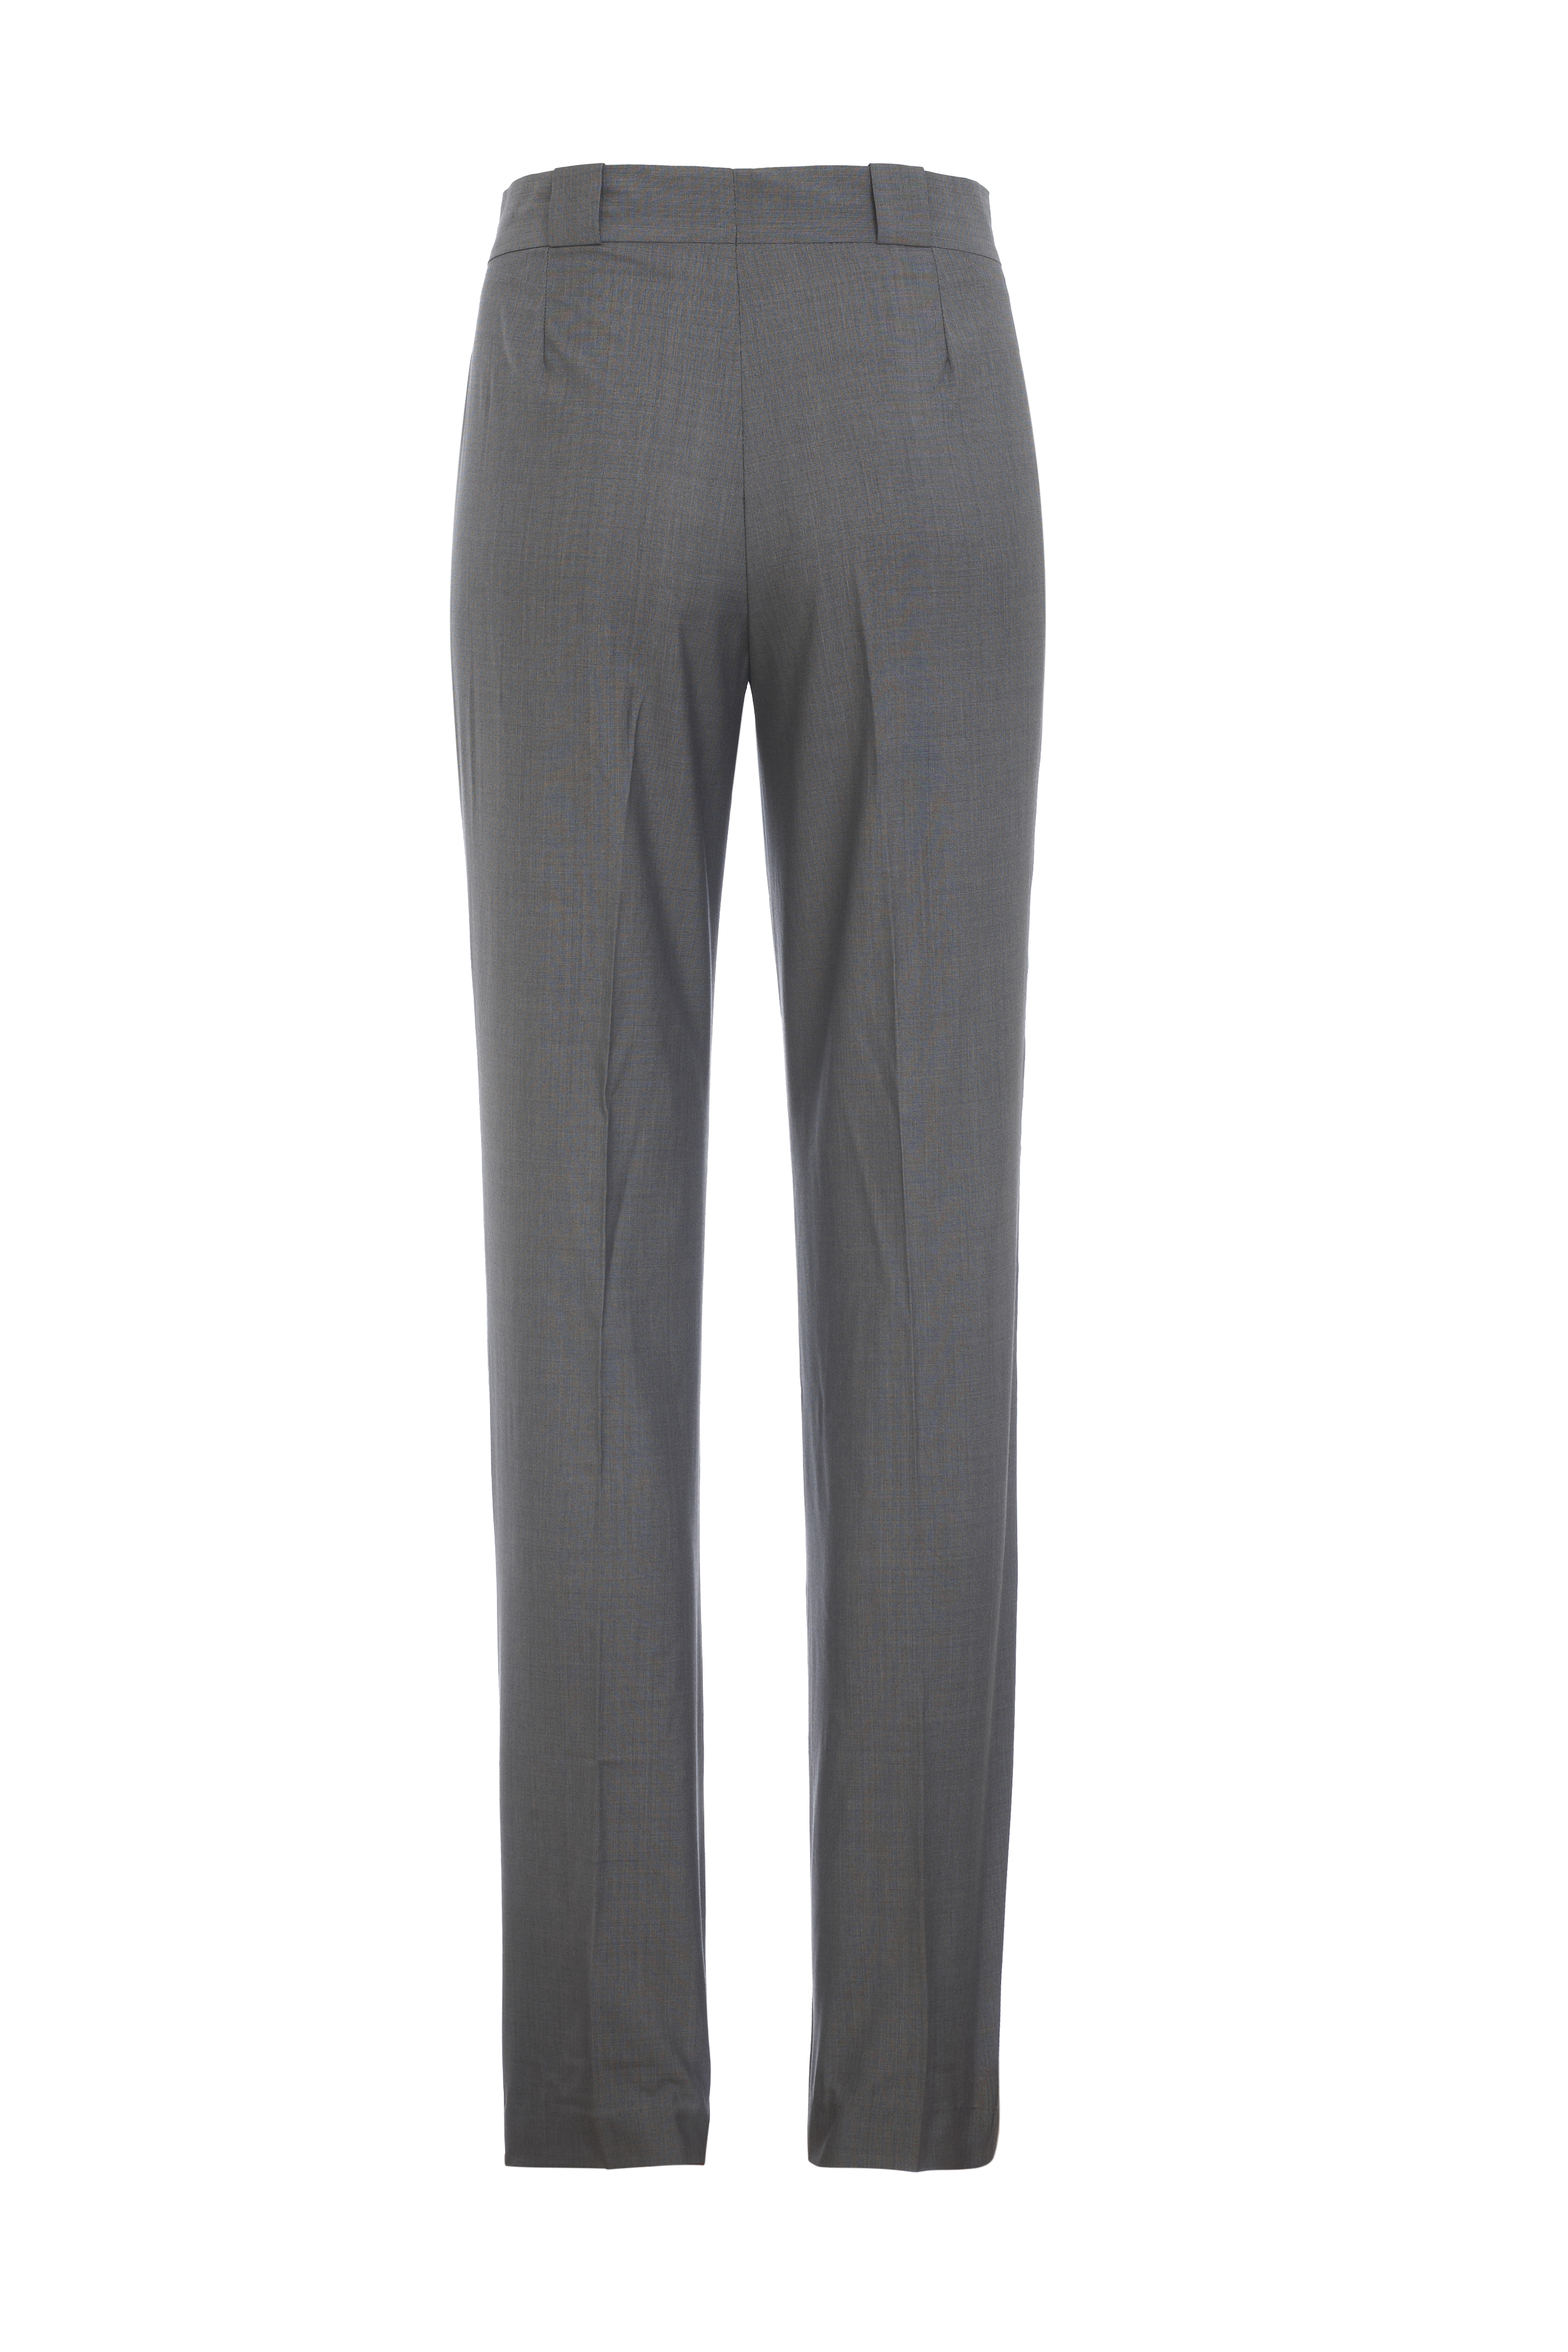 Gucci grey trousers | Curate8